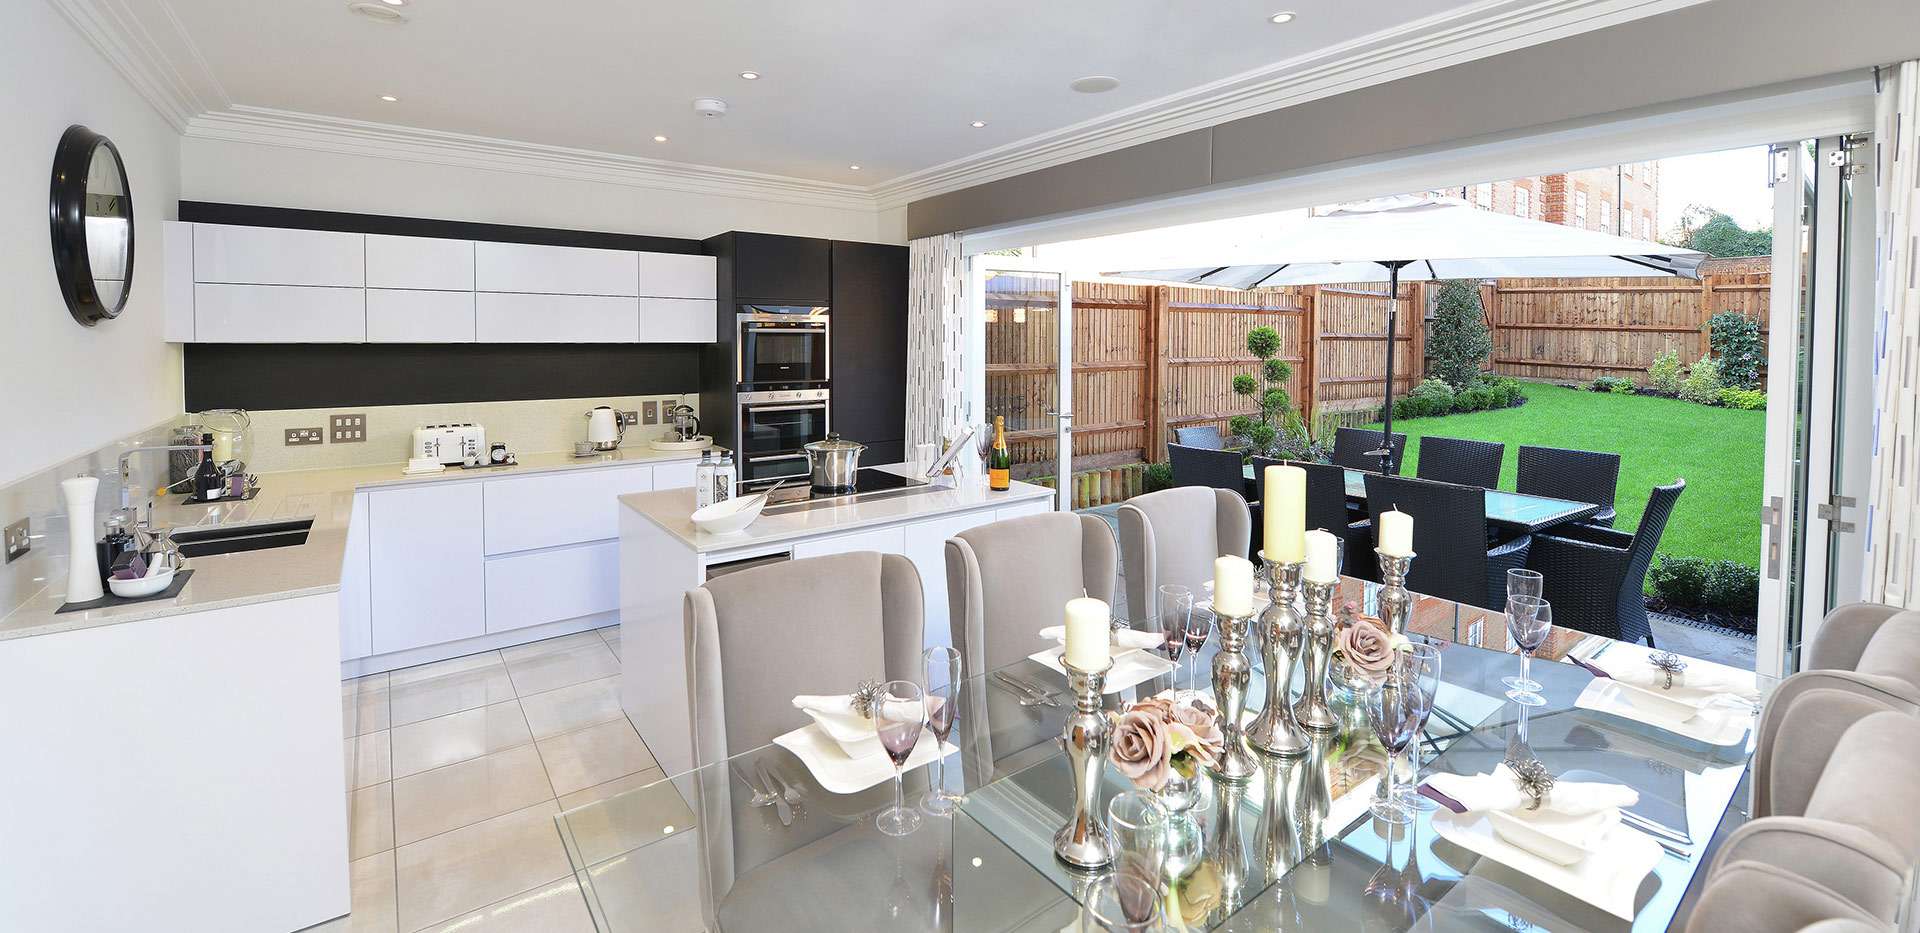 Berkeley, The Avenue, Finchley, Interior, Kitchen/ Dining